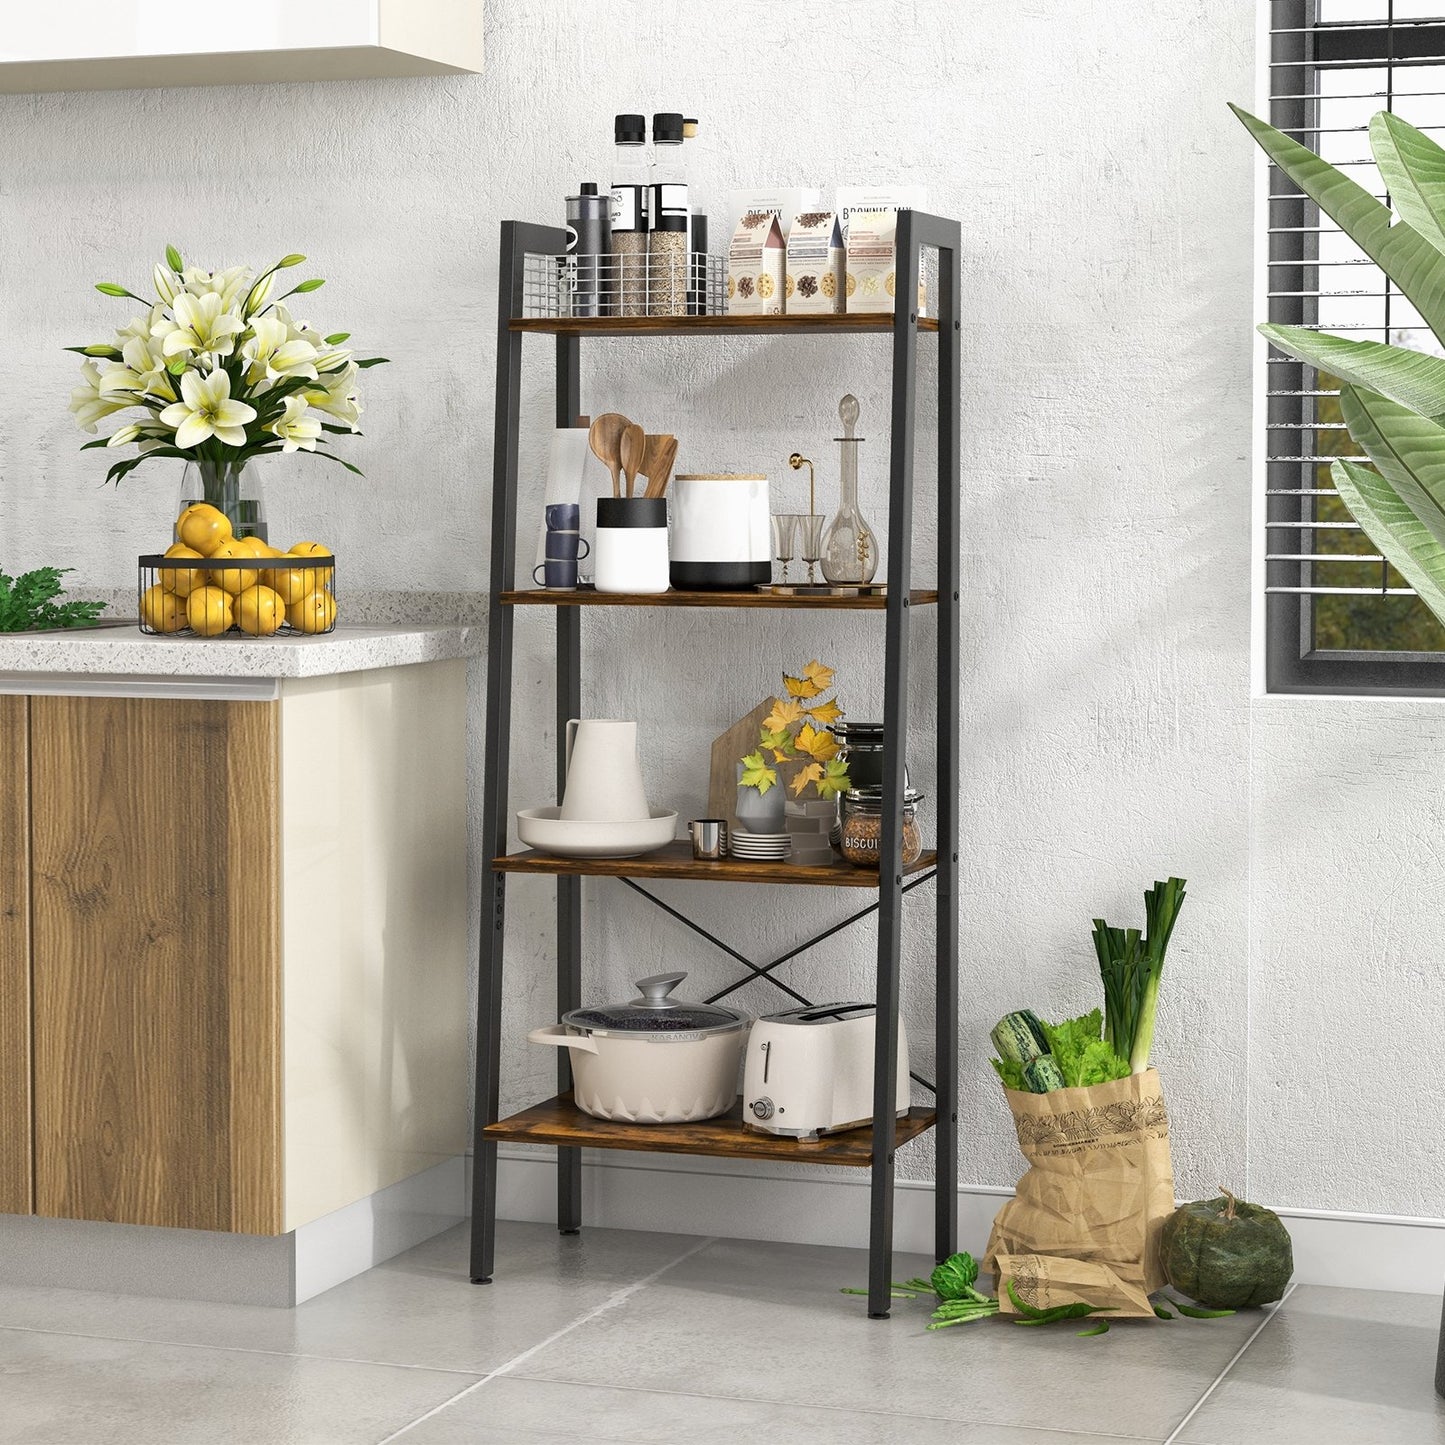 4-Tier Bookshelf with Metal Frame and Adjustable Foot Pads, Rustic Brown